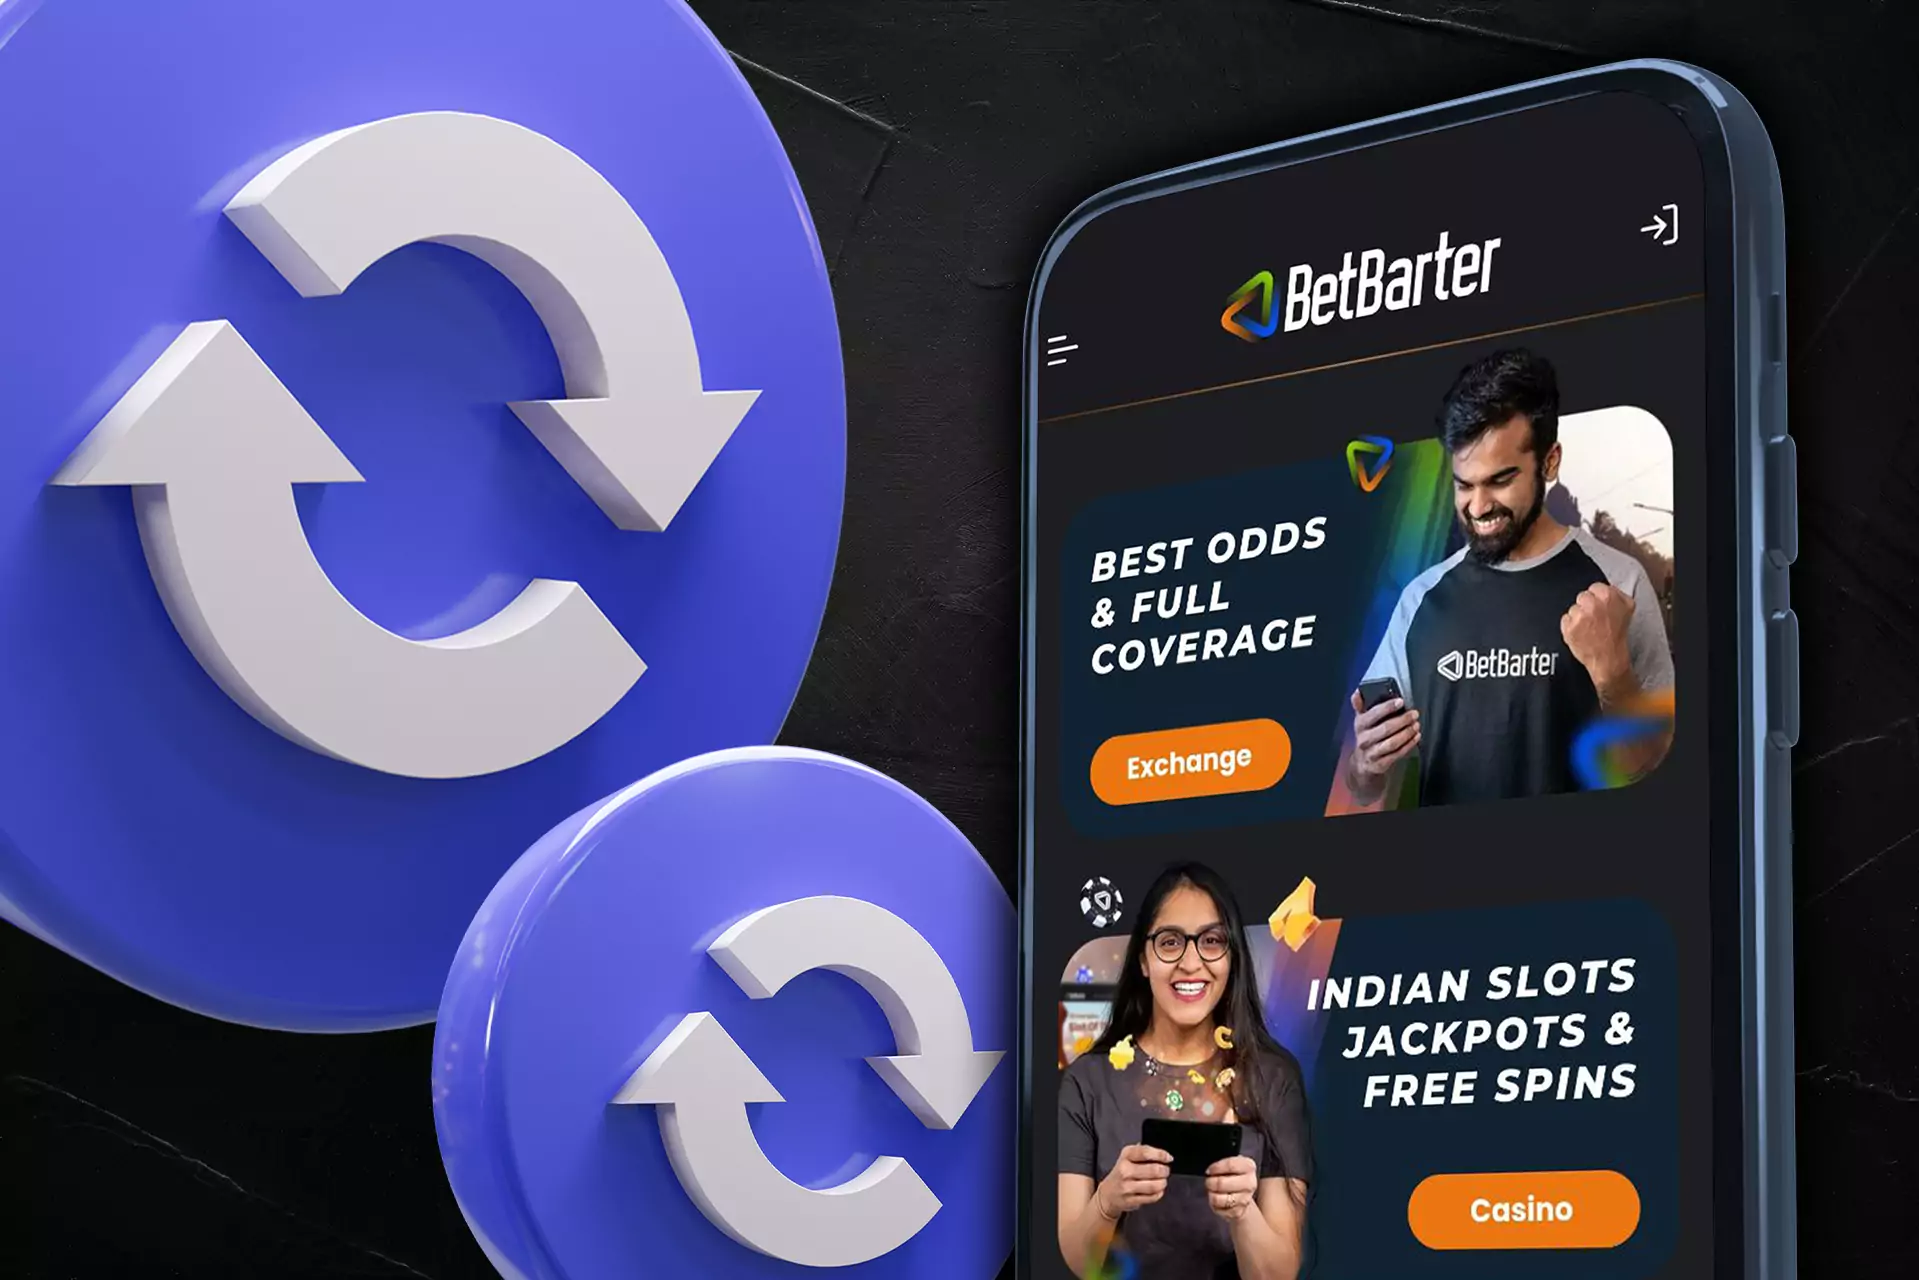 The Betbarter app is updated regularly.